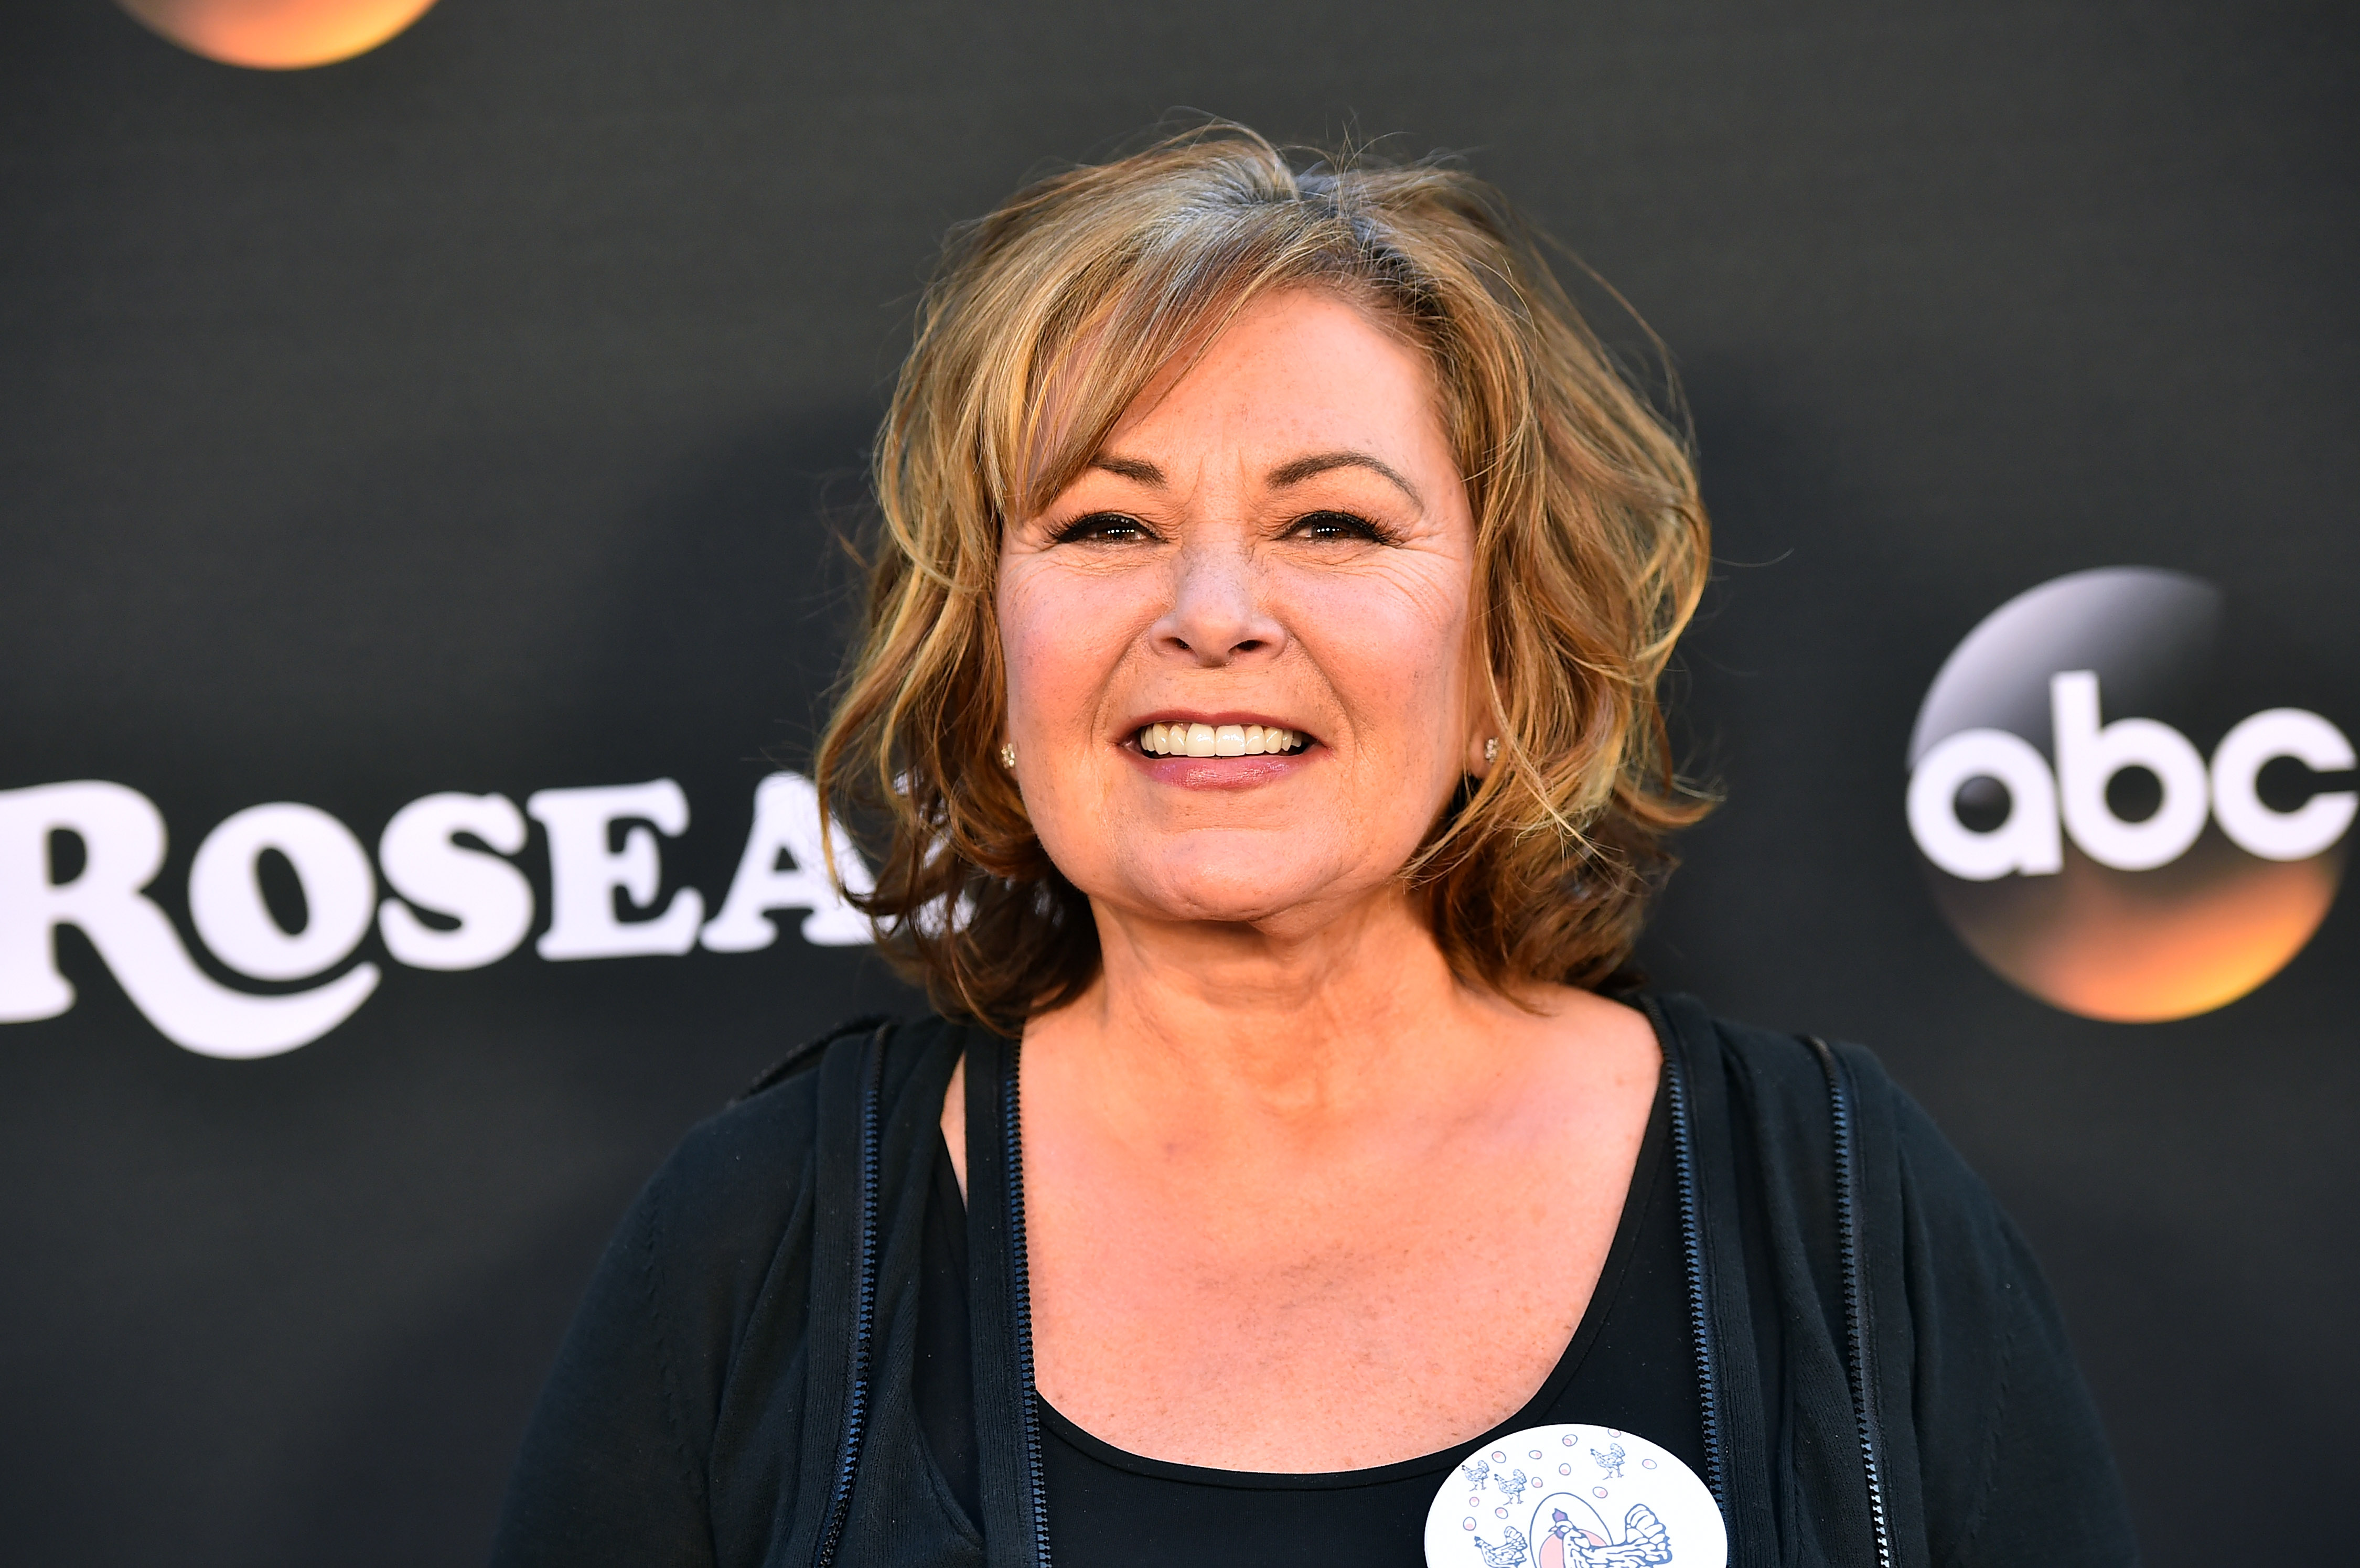 Roseanne Barr attends the premiere of ABC's "Roseanne" at Walt Disney Studio Lot  in Burbank, Calif. on March 23, 2018. (Alberto E. Rodriguez—Getty Images)